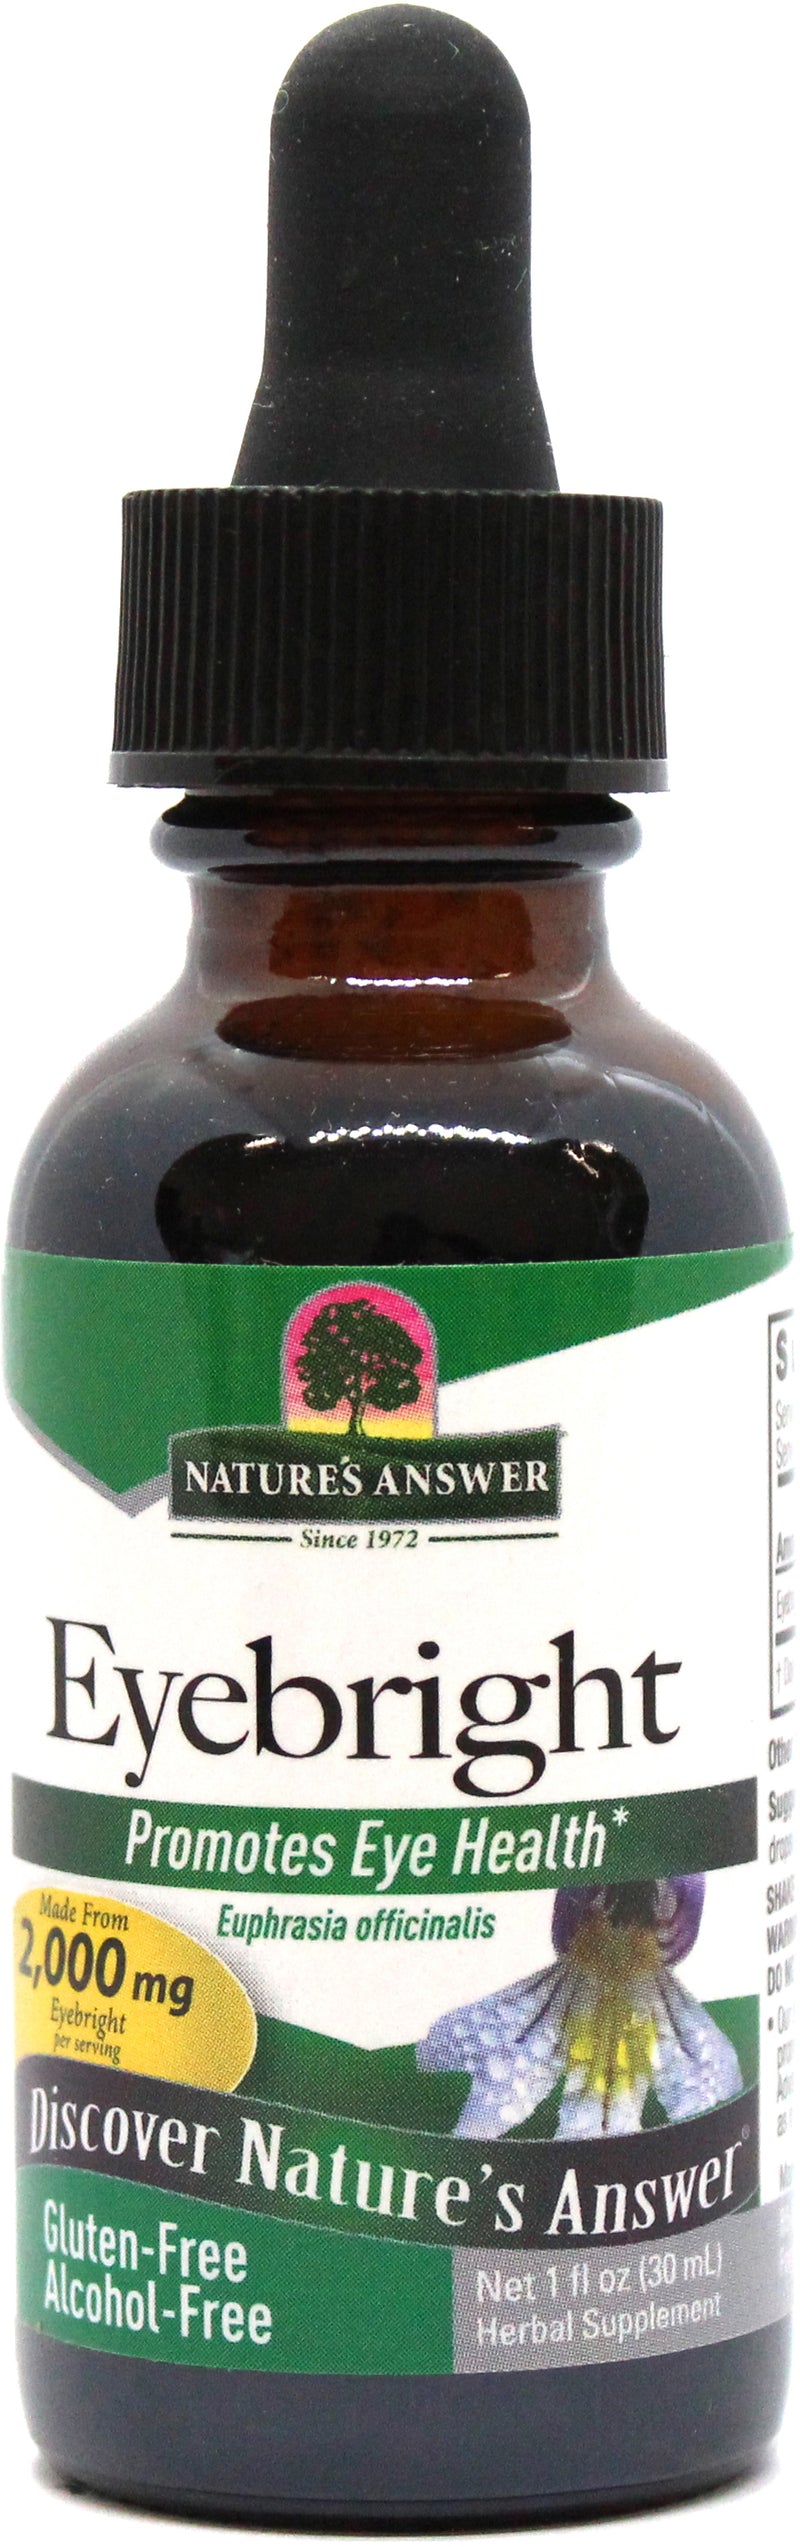 Nature’s Answer Eyebright Herb (Alcohol-Free)